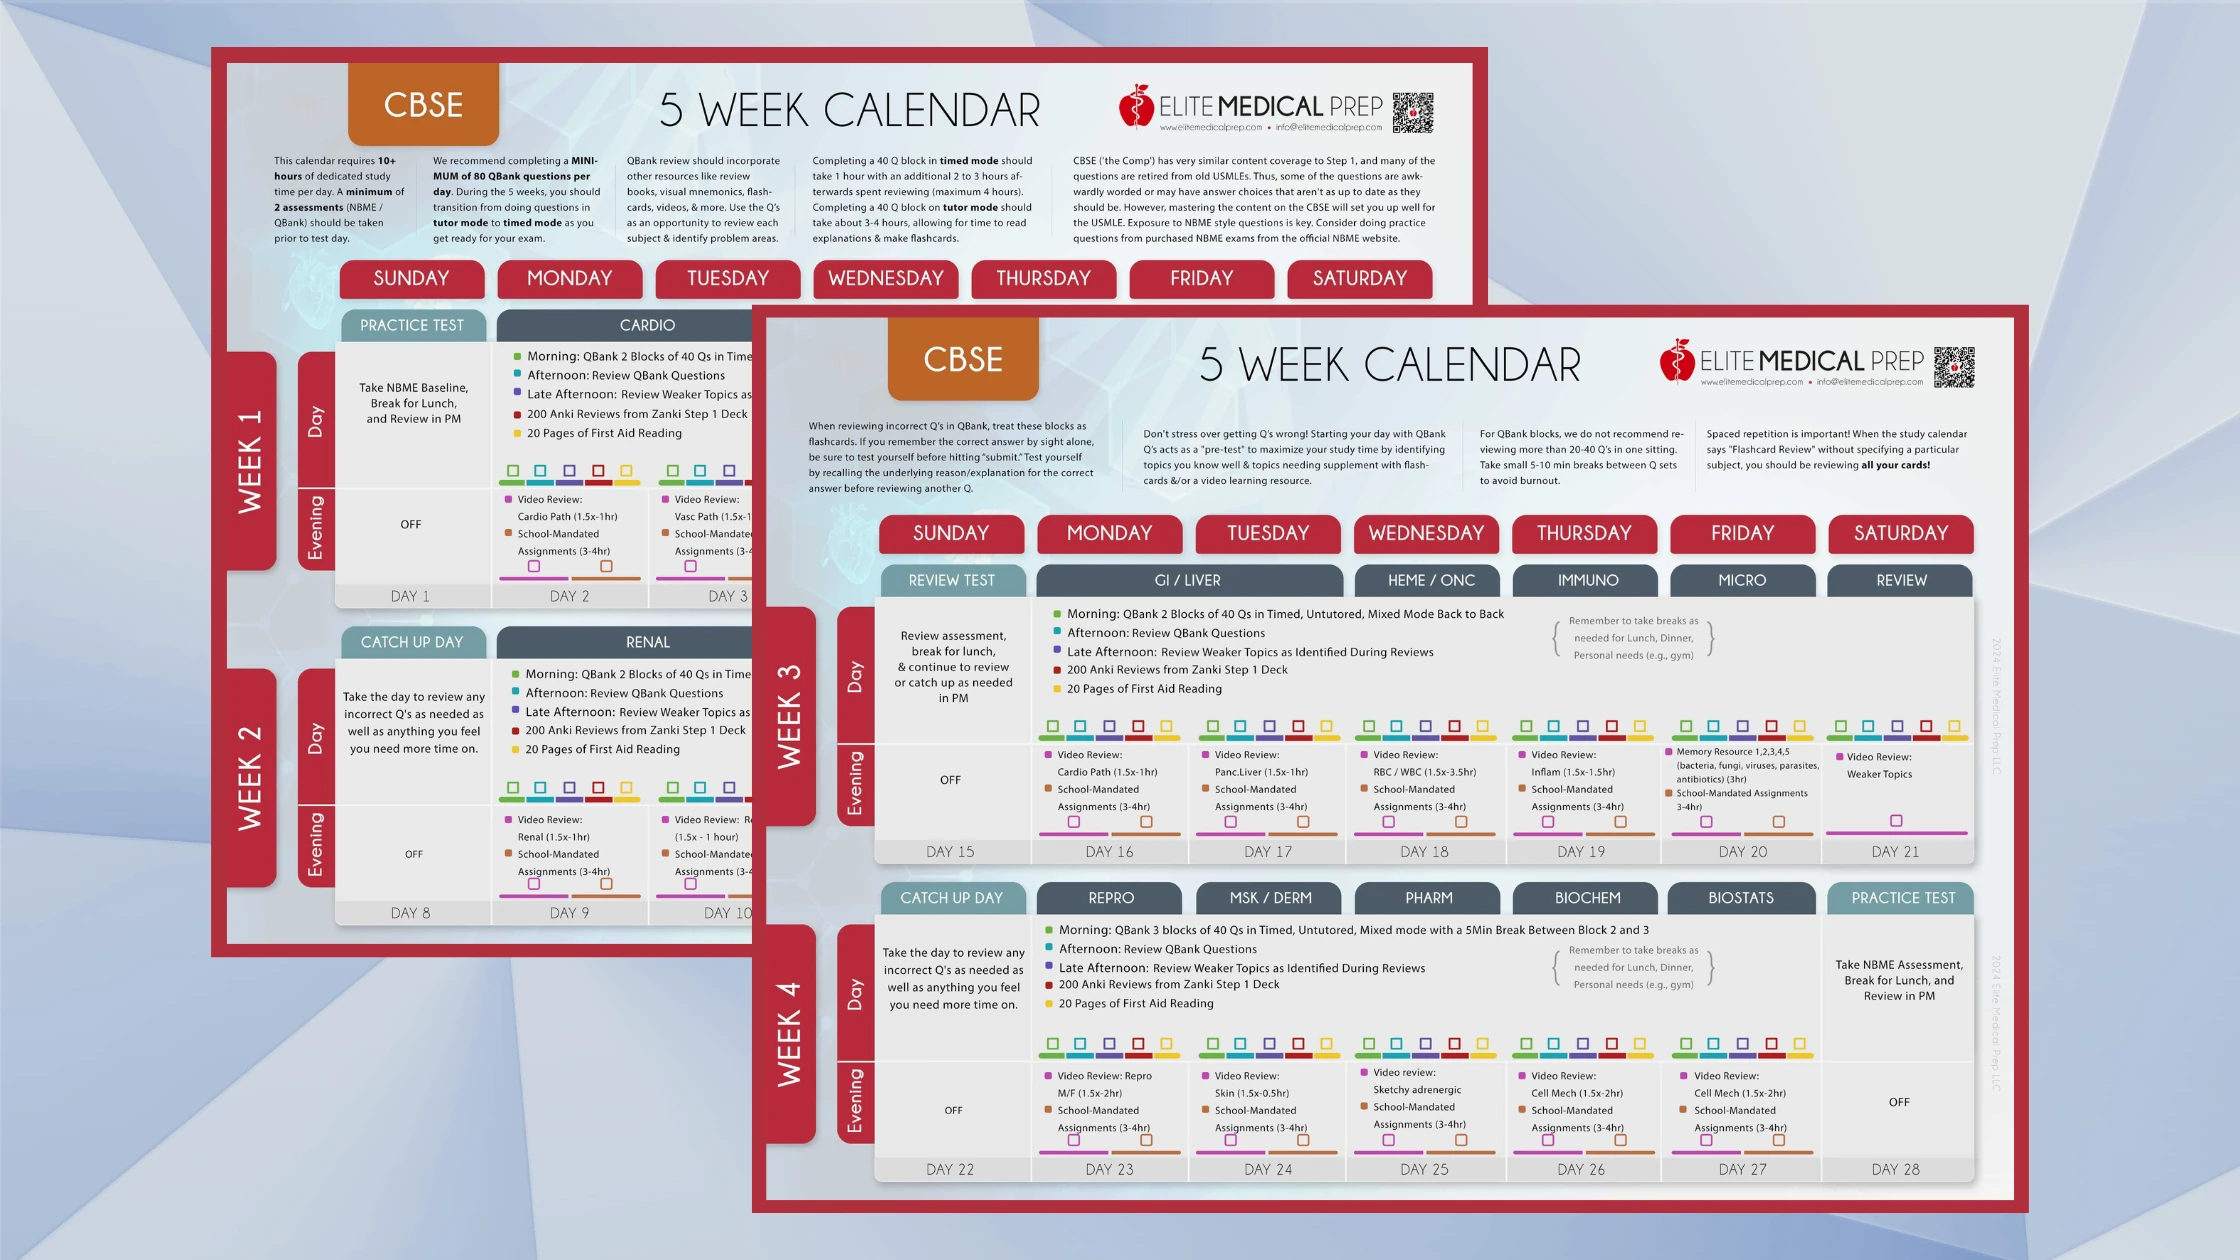 5-week Study Planner preview image for CBSE by Elite Medical Prep.